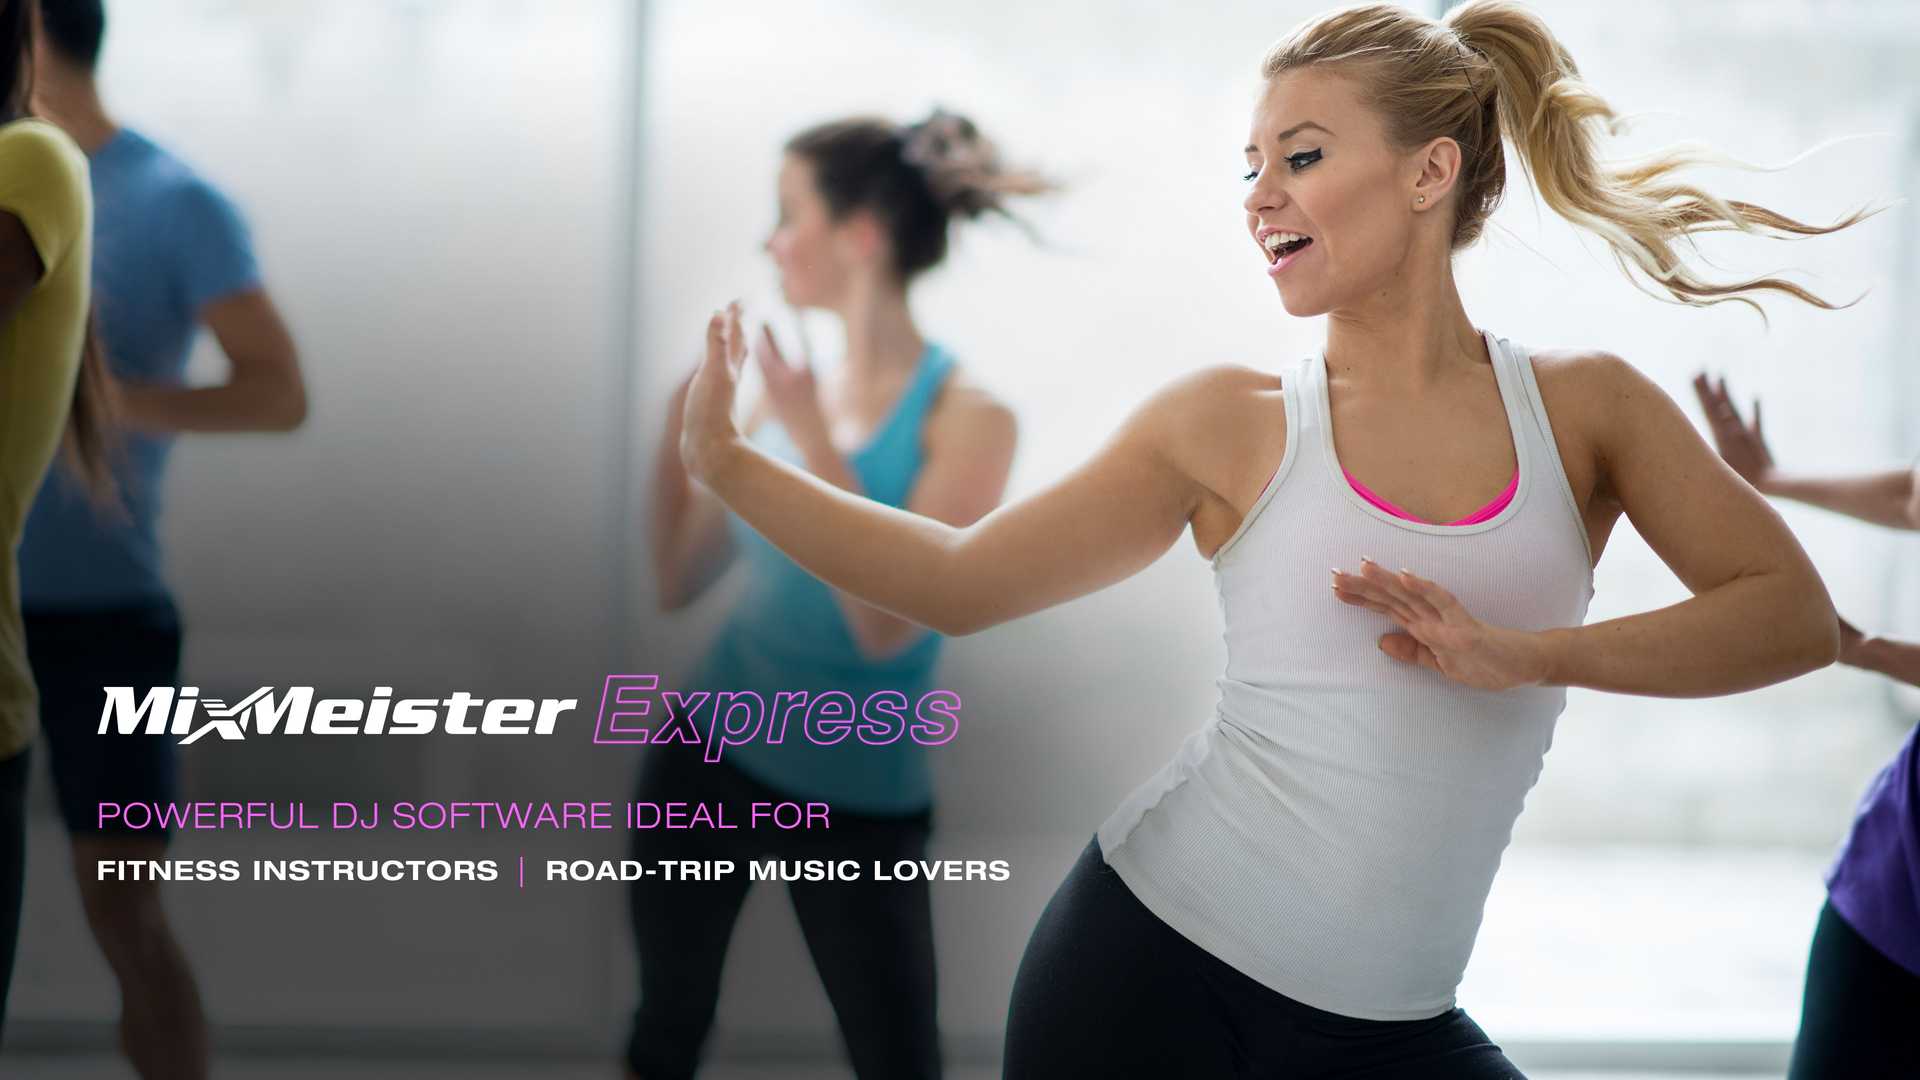 MixMeister Express, Powerful DJ Software Ideal for Fitness instructors or road-trip music lovers